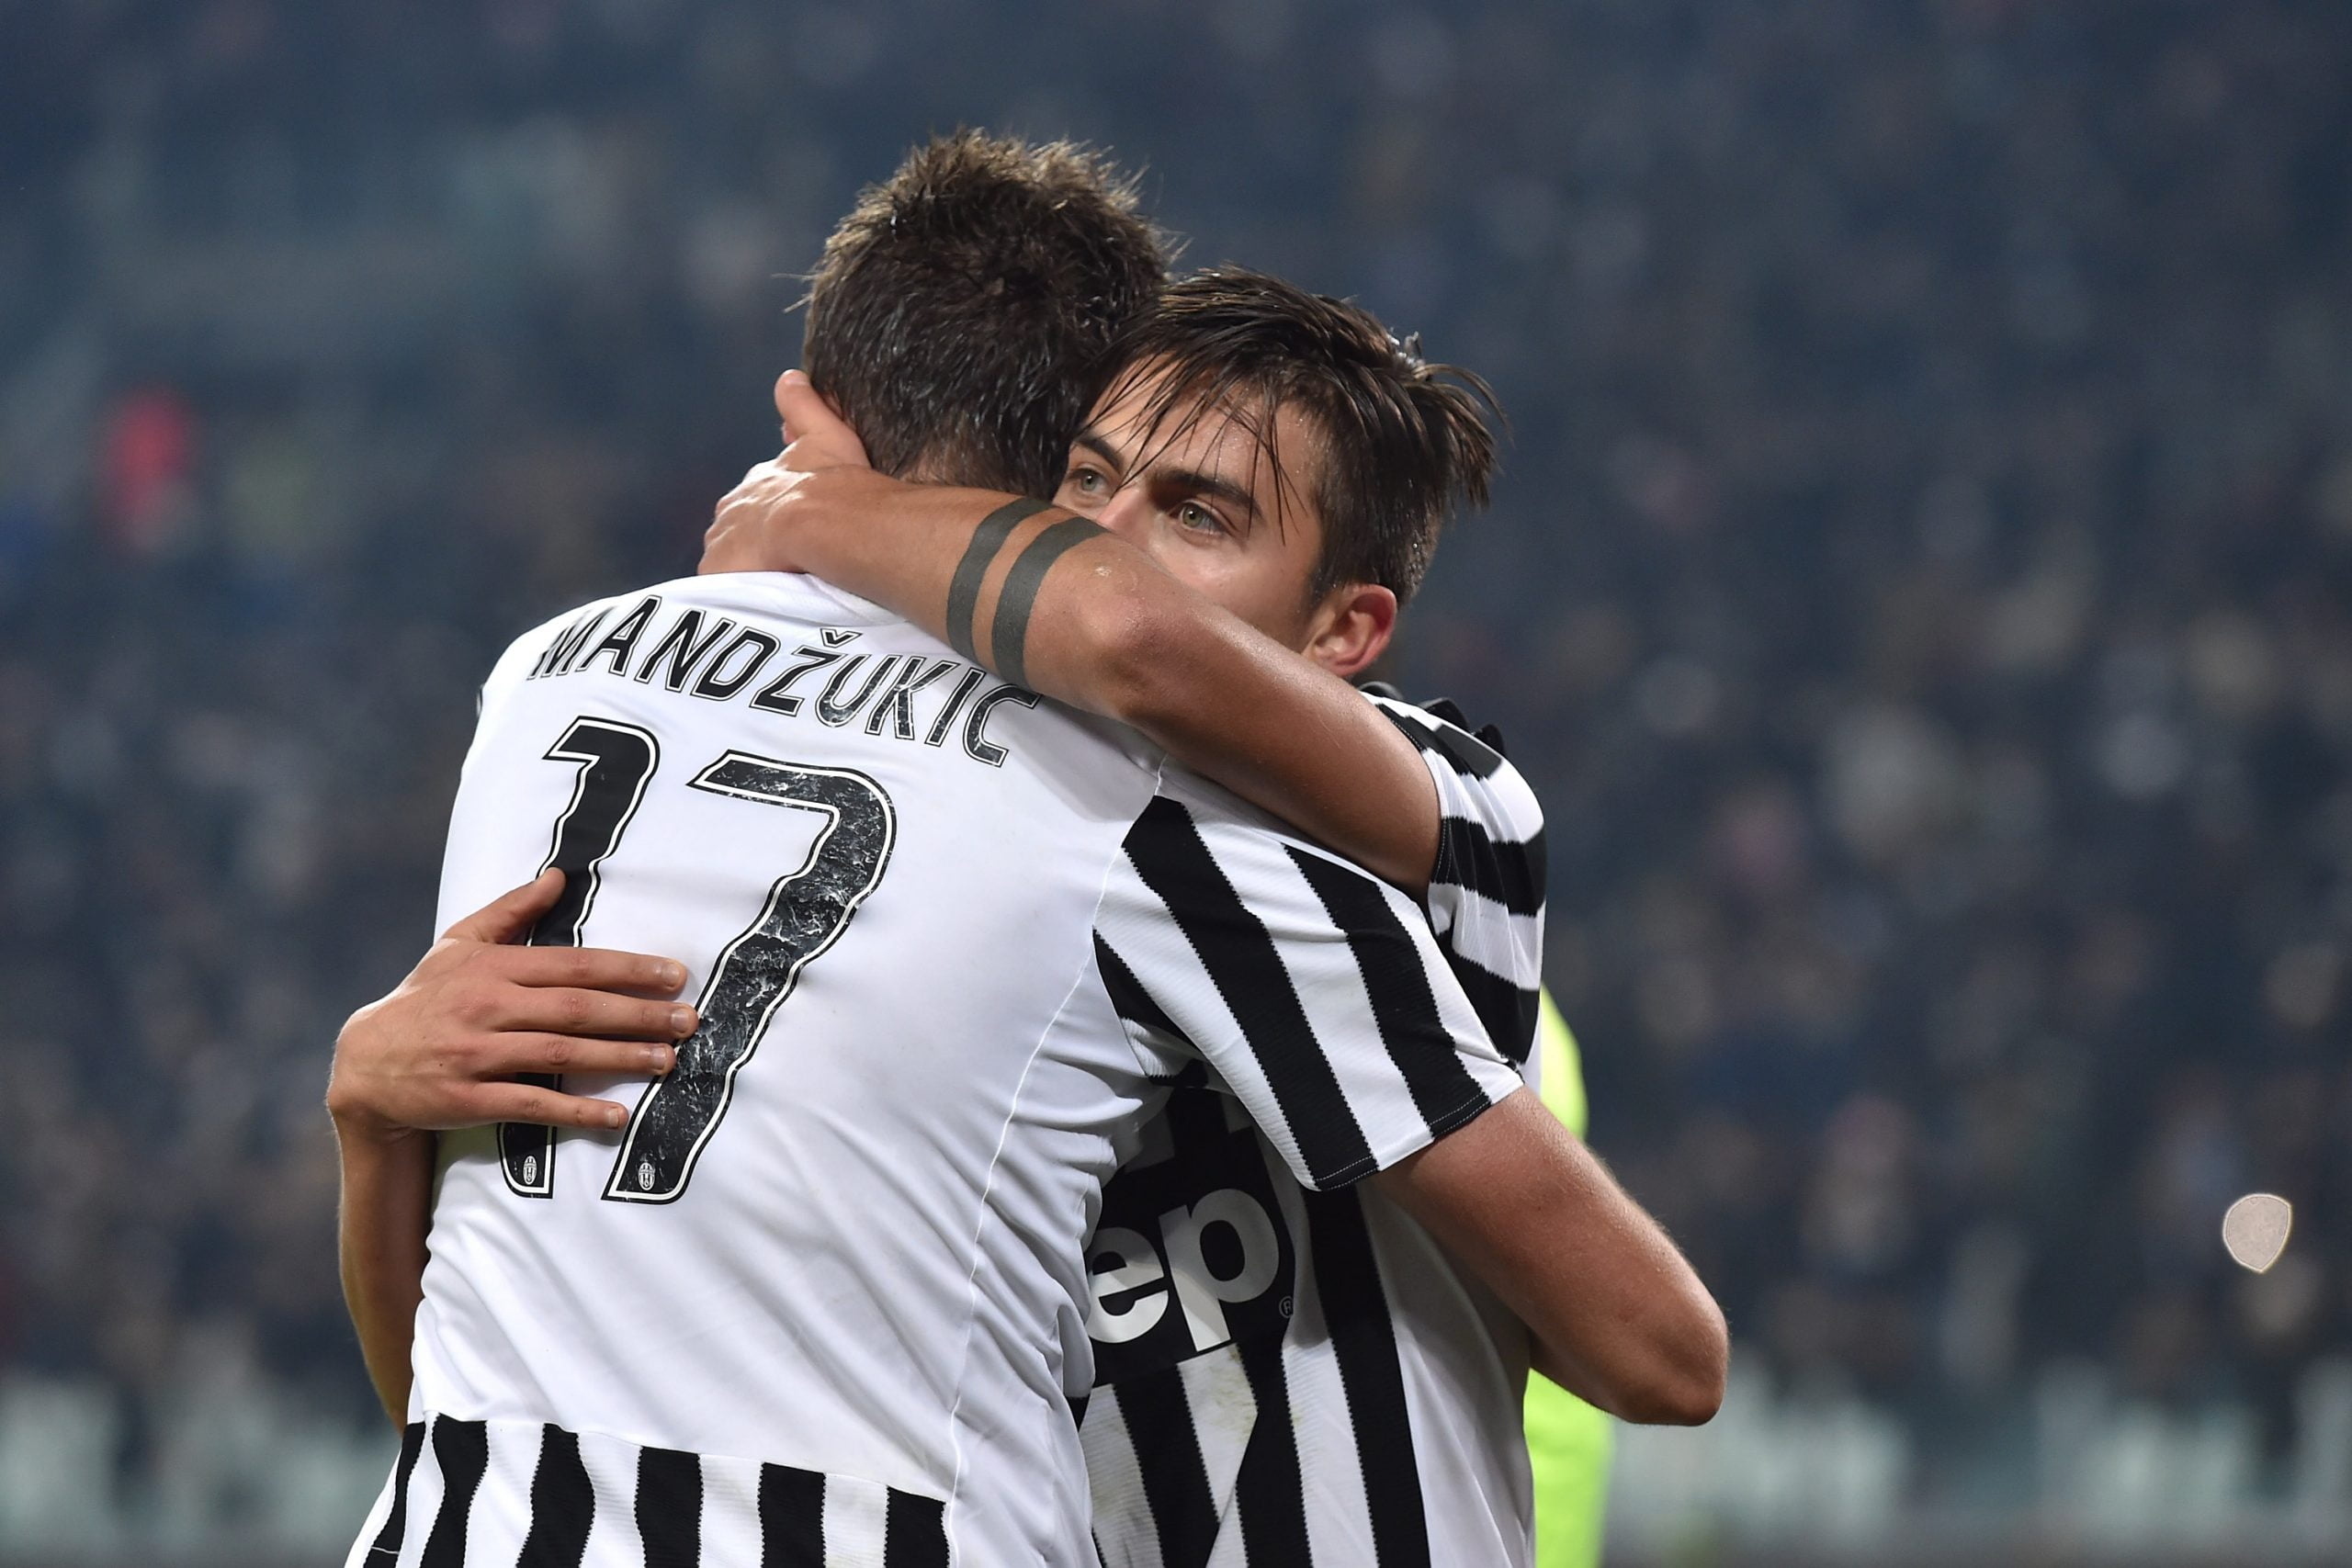 TURIN, ITALY - DECEMBER 13:  Mario Mandzukic (L) of Juventus FC celebrates his goal with team mate Paulo Dybala during the Serie A match betweeen Juventus FC and ACF Fiorentina at Juventus Arena on December 13, 2015 in Turin, Italy.  (Photo by Valerio Pennicino/Getty Images)